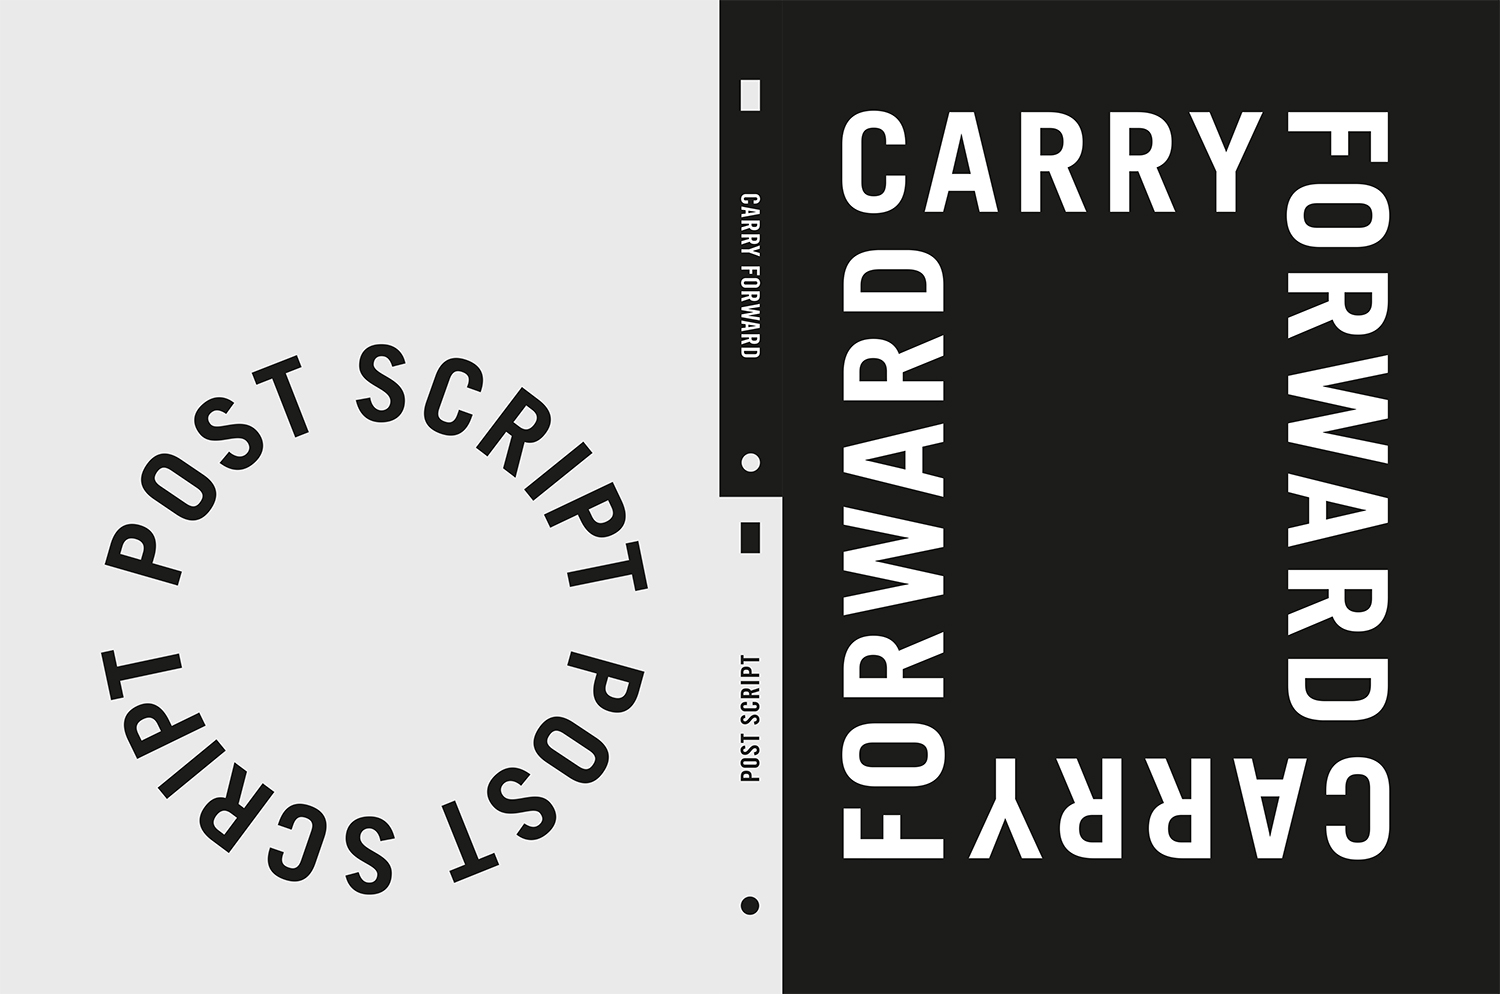 Dual cover and spine image of Carry Forward / Post Script, with the titles presented as doubled texts making rectangular and circular shapes in stark black and white capitalized text